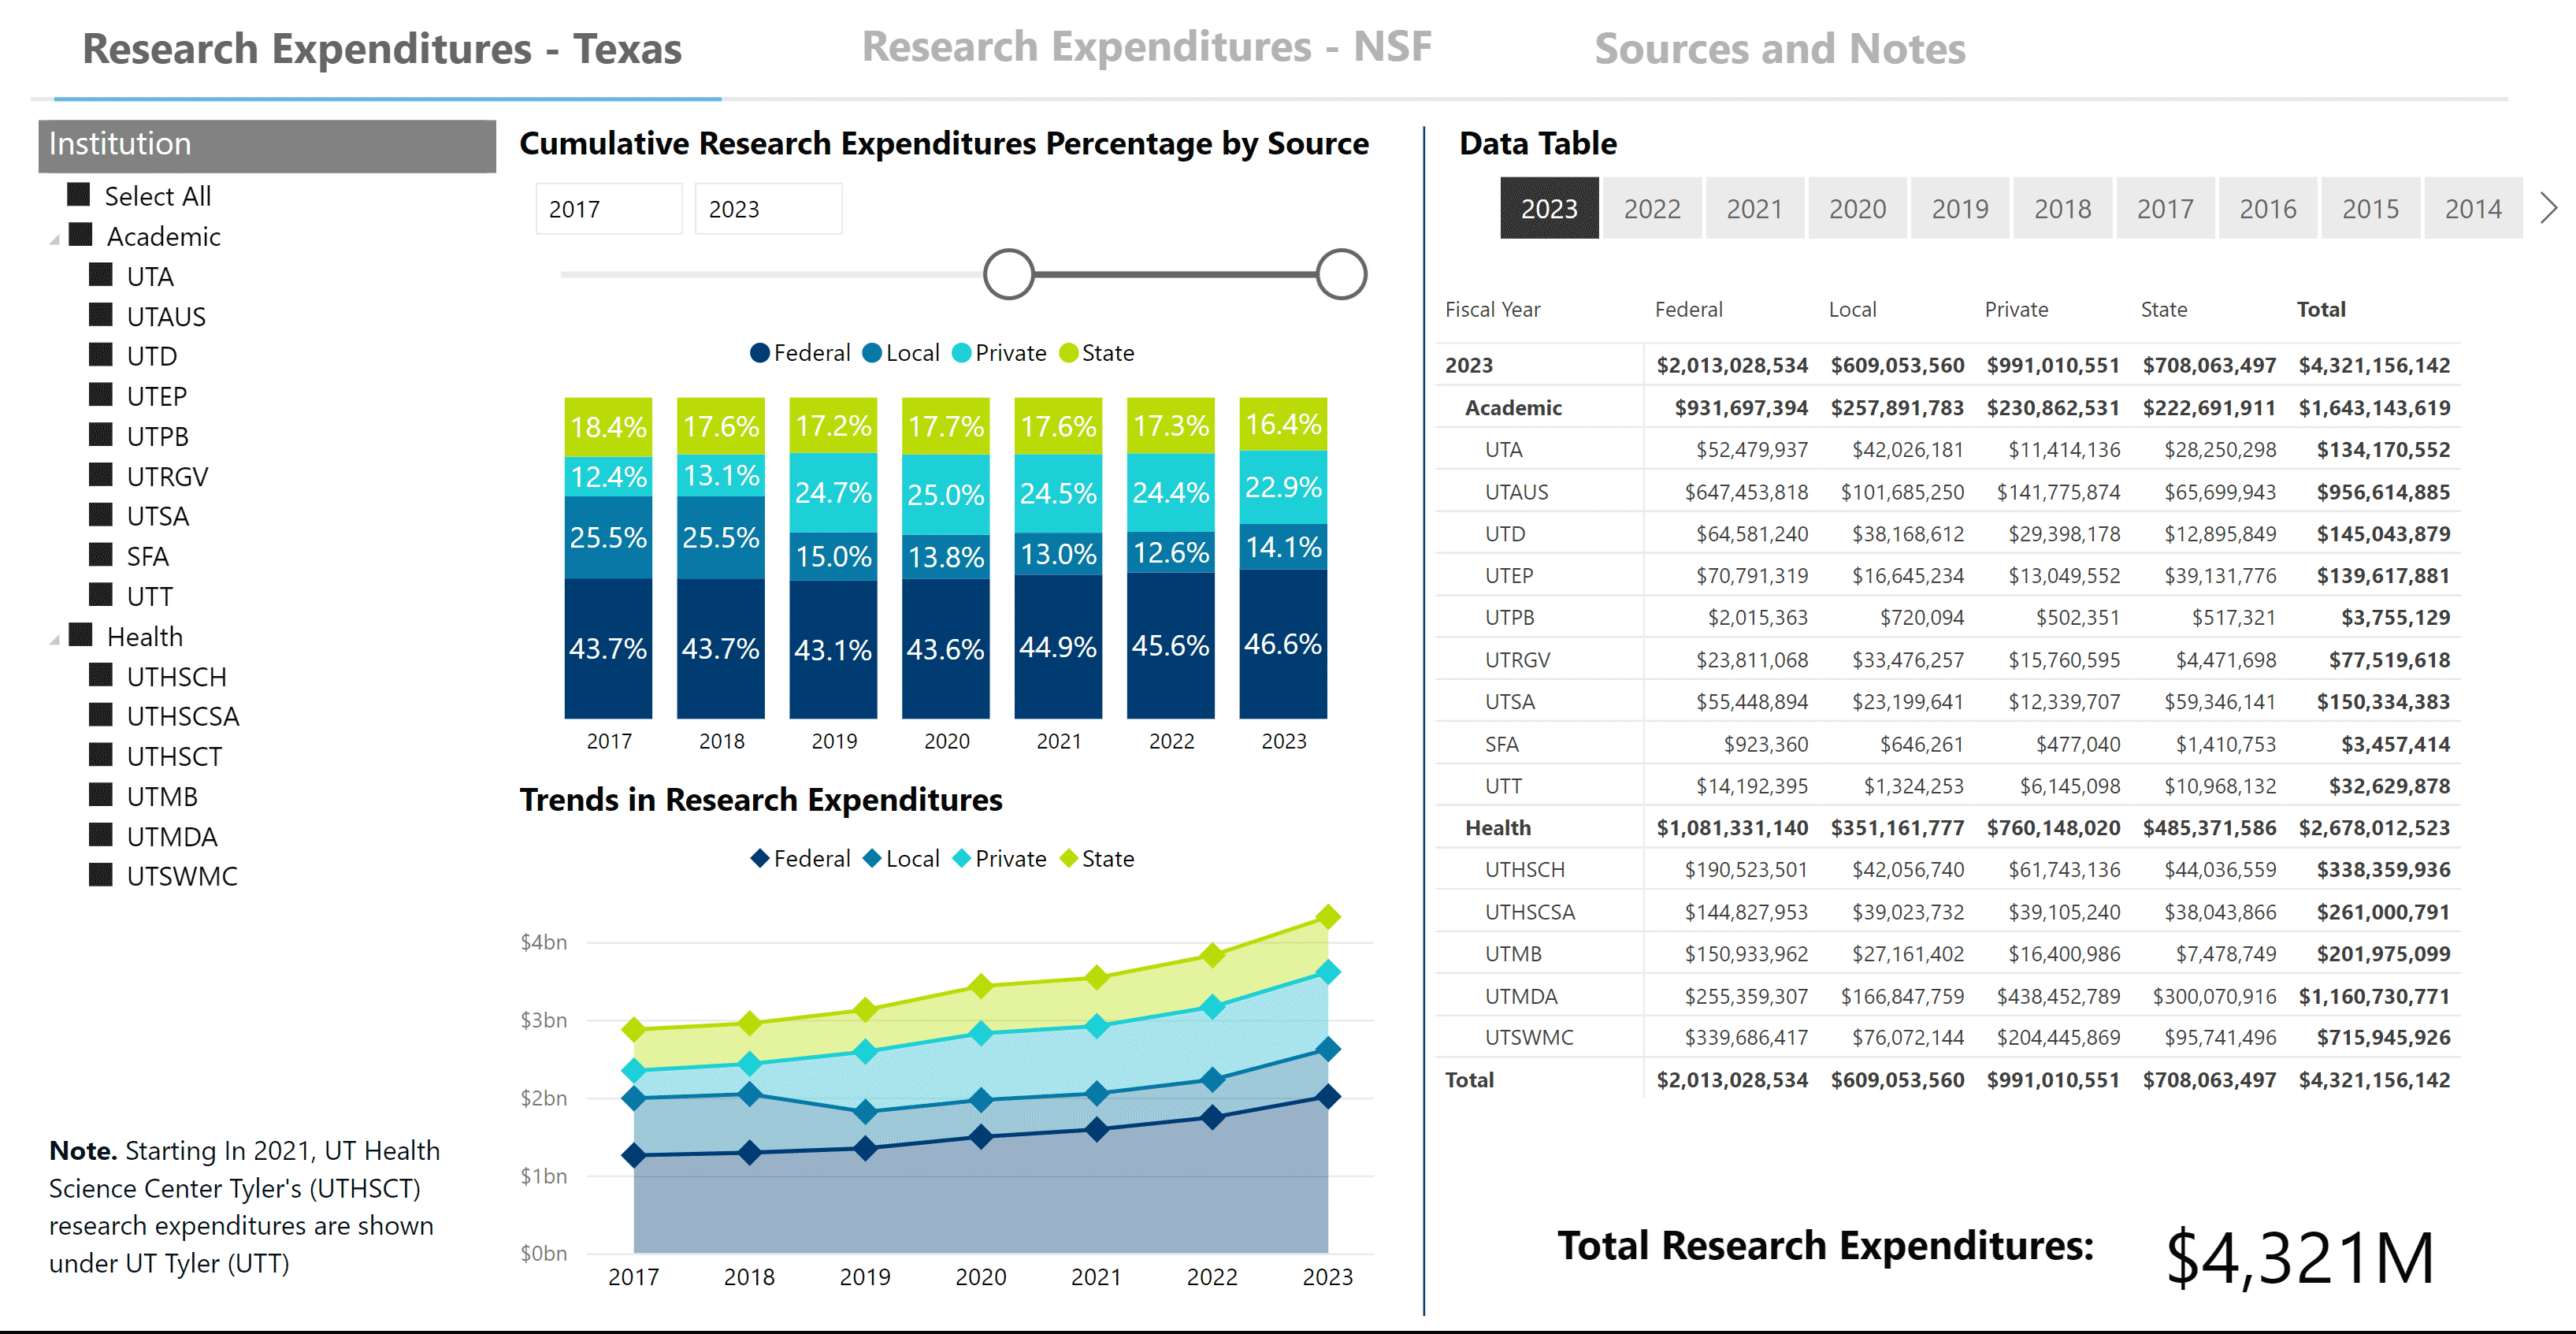 Data tables and sets showing UT institutions research expenditures totaling 4,321 million dollars.